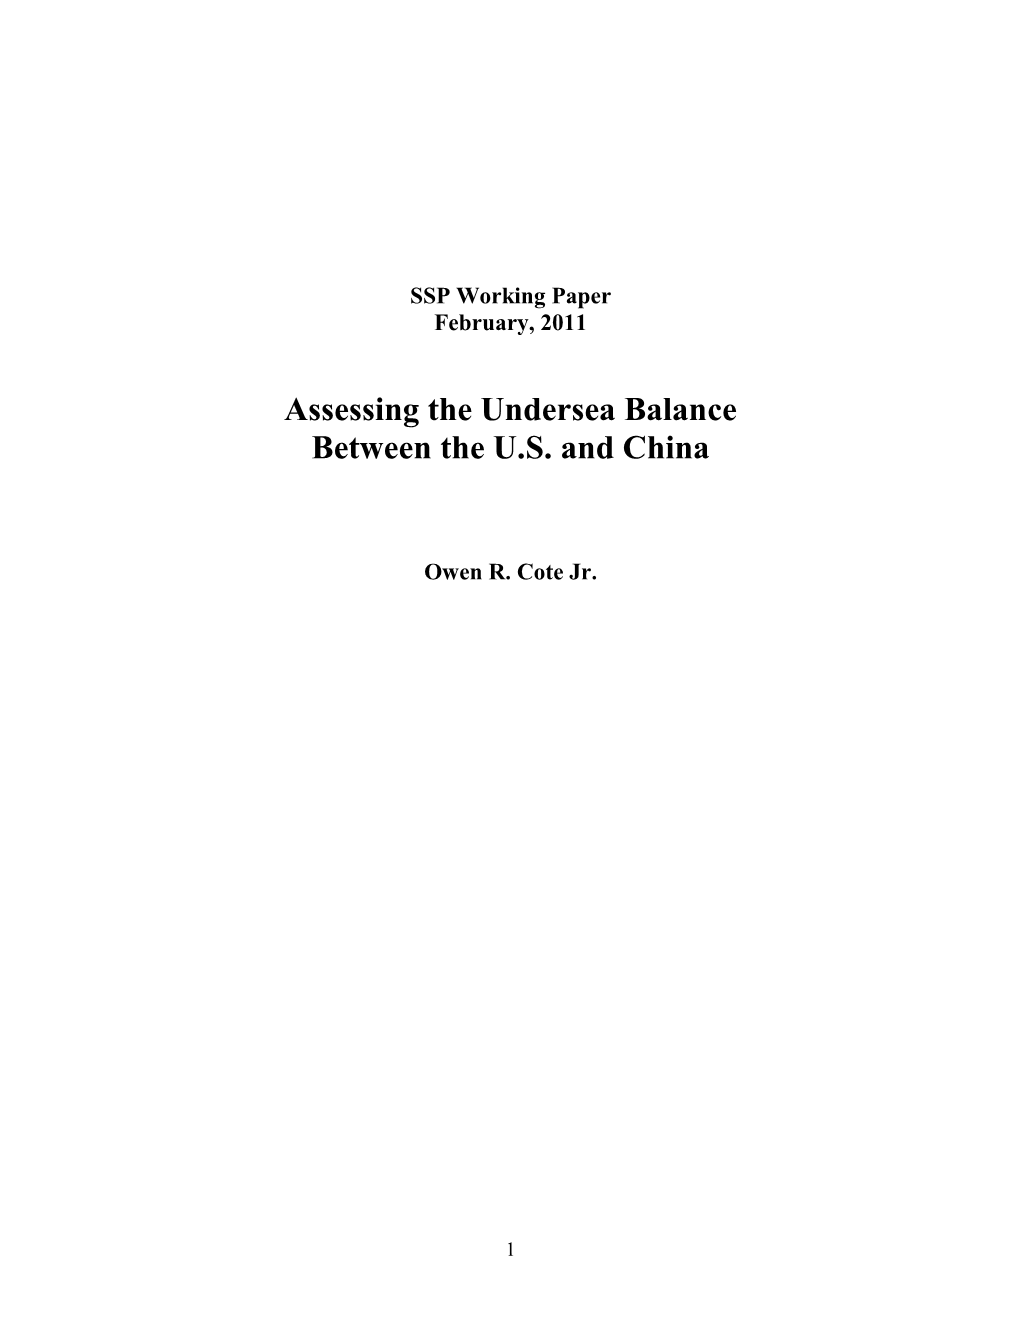 Assessing the Undersea Balance Between the US and China